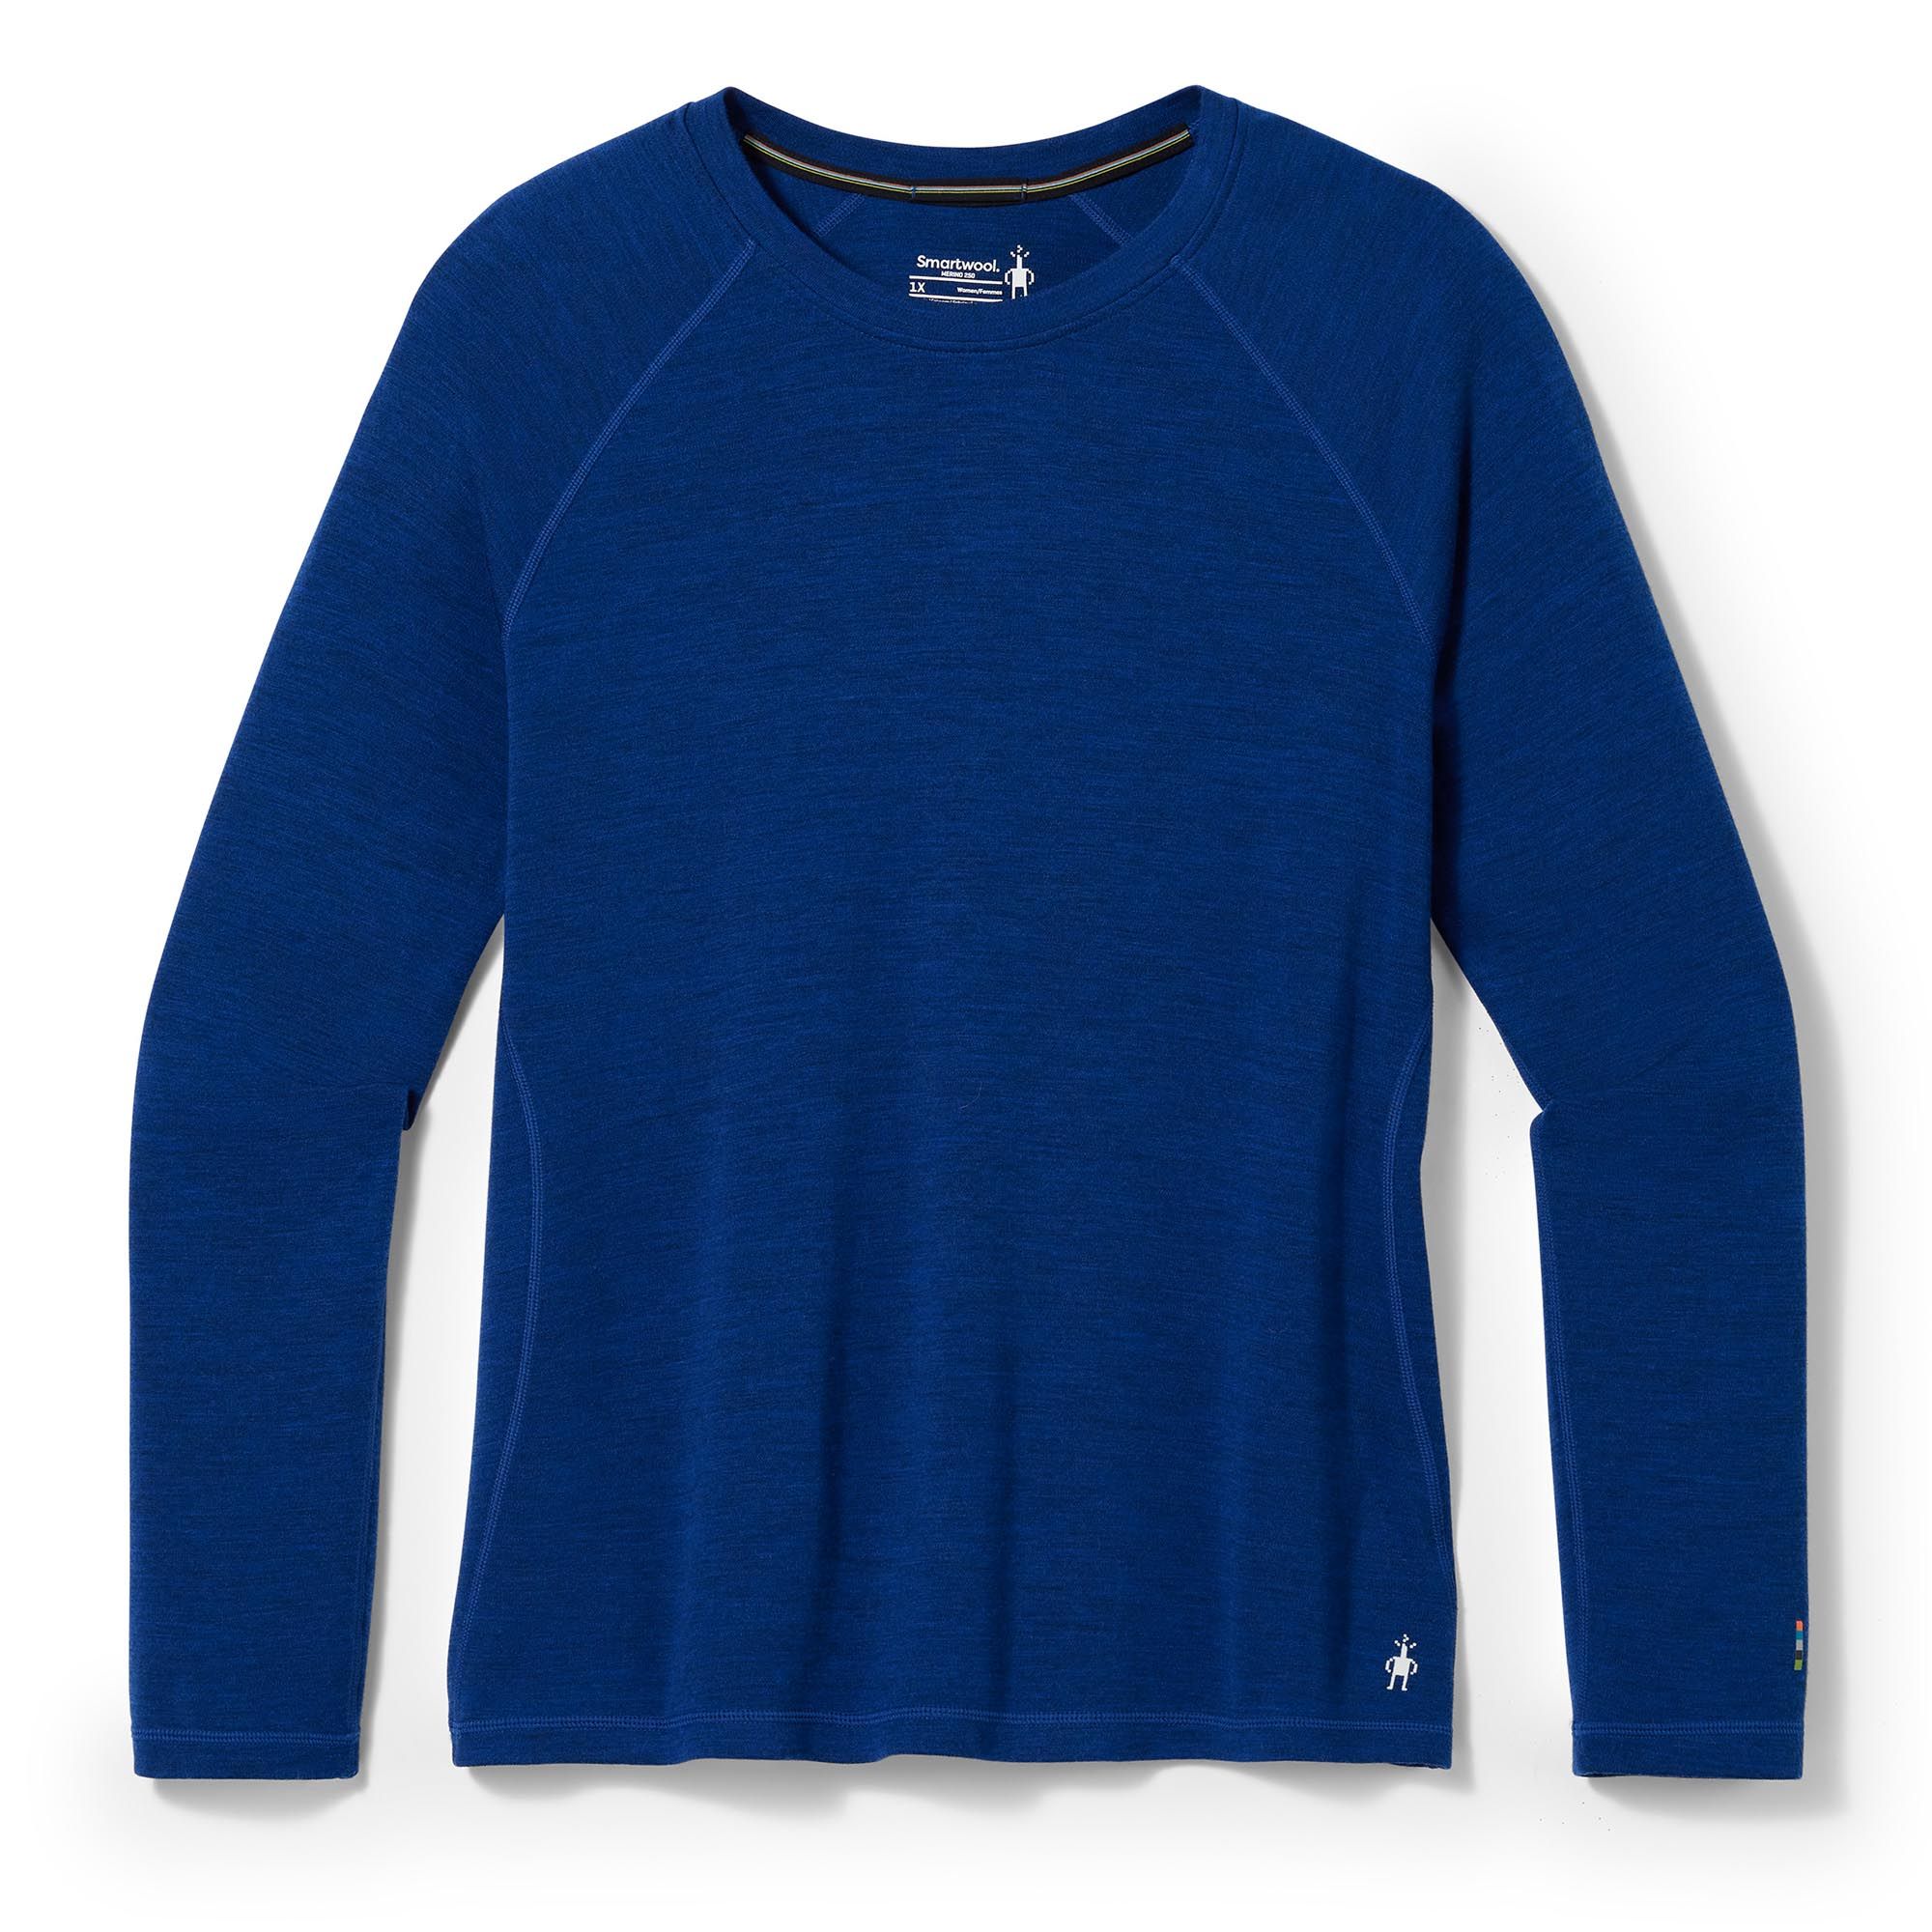 Women's Classic Thermal Merino Base Layer Crew Plus in Blueberry Hill Heather